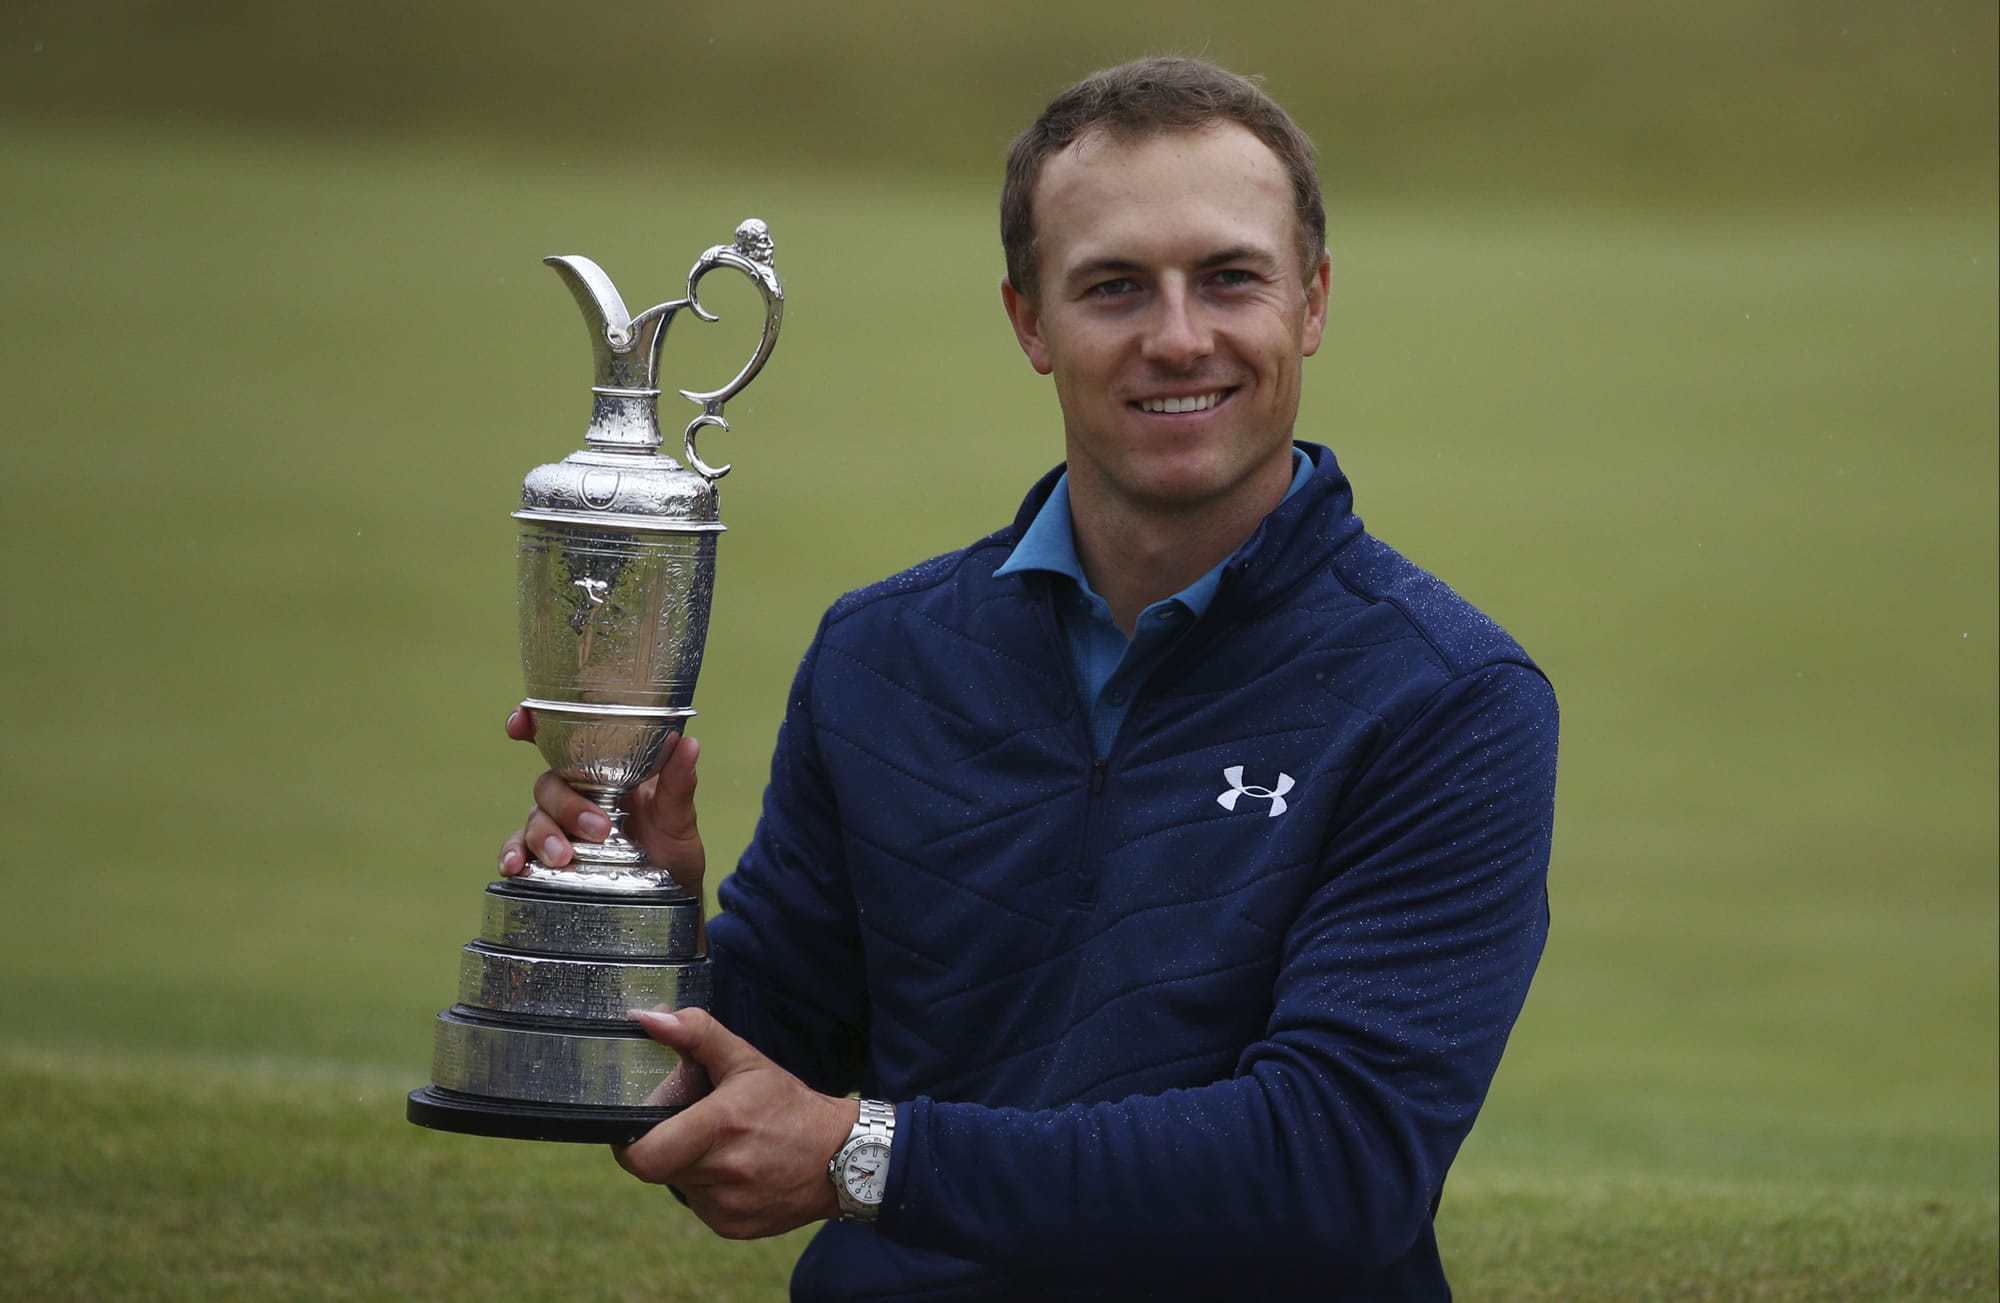 Jordan Spieth of the United States holds the Claret Jug after winning the British Open Golf Championships at Royal Birkdale, Southport, England, Sunday July 23, 2017.